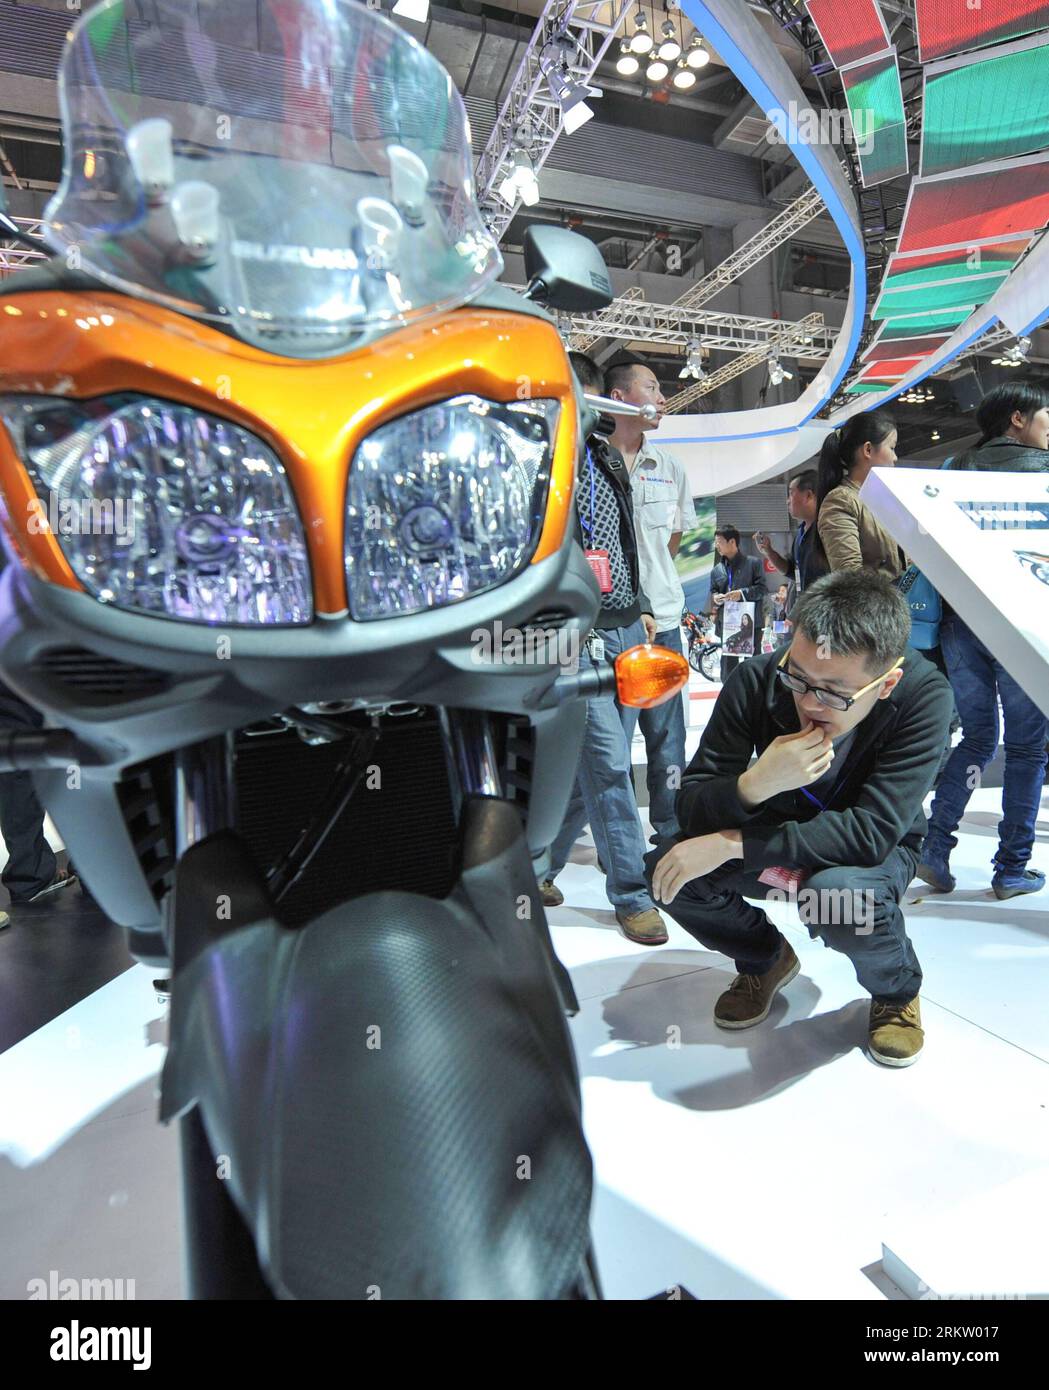 Bildnummer: 58577704  Datum: 11.10.2012  Copyright: imago/Xinhua (121011) -- CHONGQING, Oct. 11, 2012 (Xinhua) -- A visitor looks at a motorcycle exhibited in the 11th China International Motorcycle Trade Exhibition in southwest China s Chongqing Municipality, Oct. 11, 2012. More than 400 motorcycle companies from 10 countries and regions attended the four-day expo kicked off on Thursday. About 100 international traders also participated in the fair, and the purchase sum is expected to exceed 100 million U.S. dollars. (Xinhua/Liu Chan) (hy) CHINA-CHONGQING-MOTOR CYCLE EXPO-OPENING (CN) PUBLICA Stock Photo